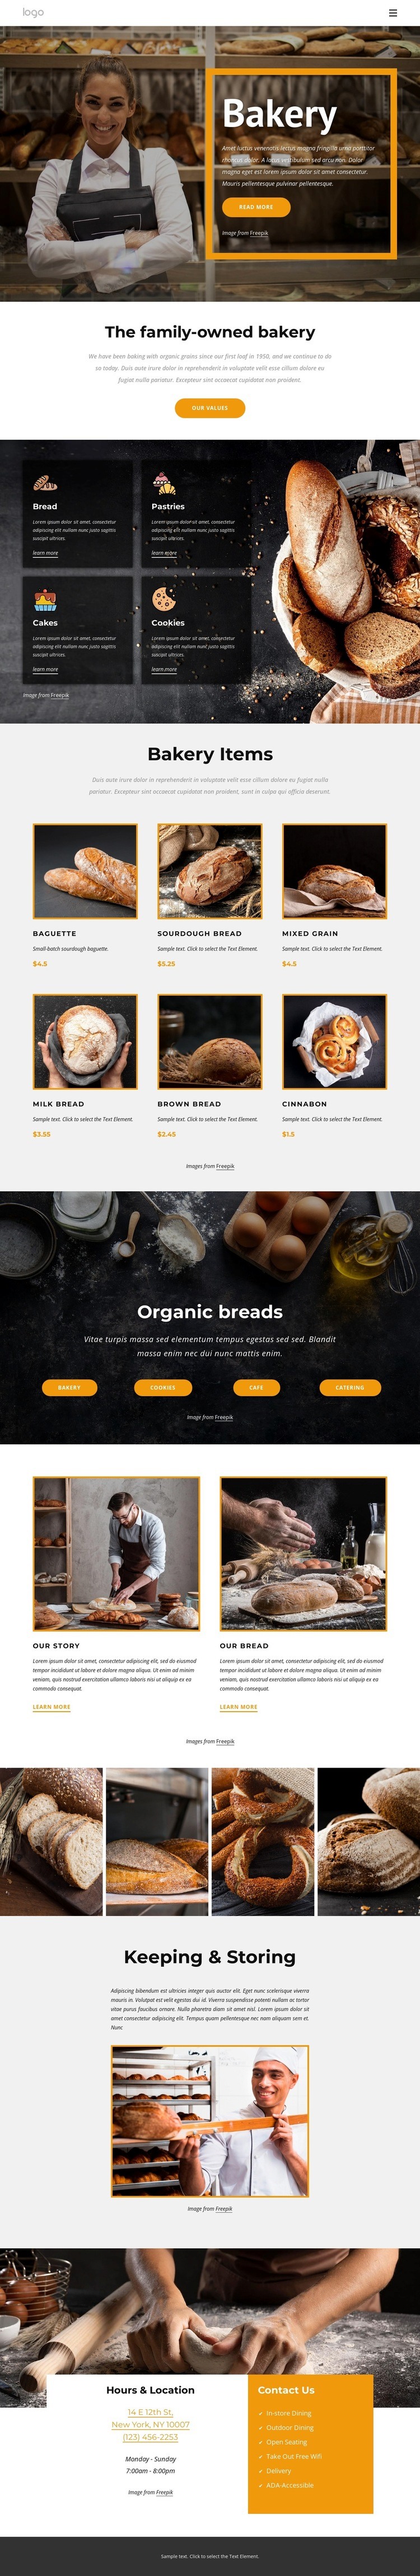 The family-owned bakery Web Page Design